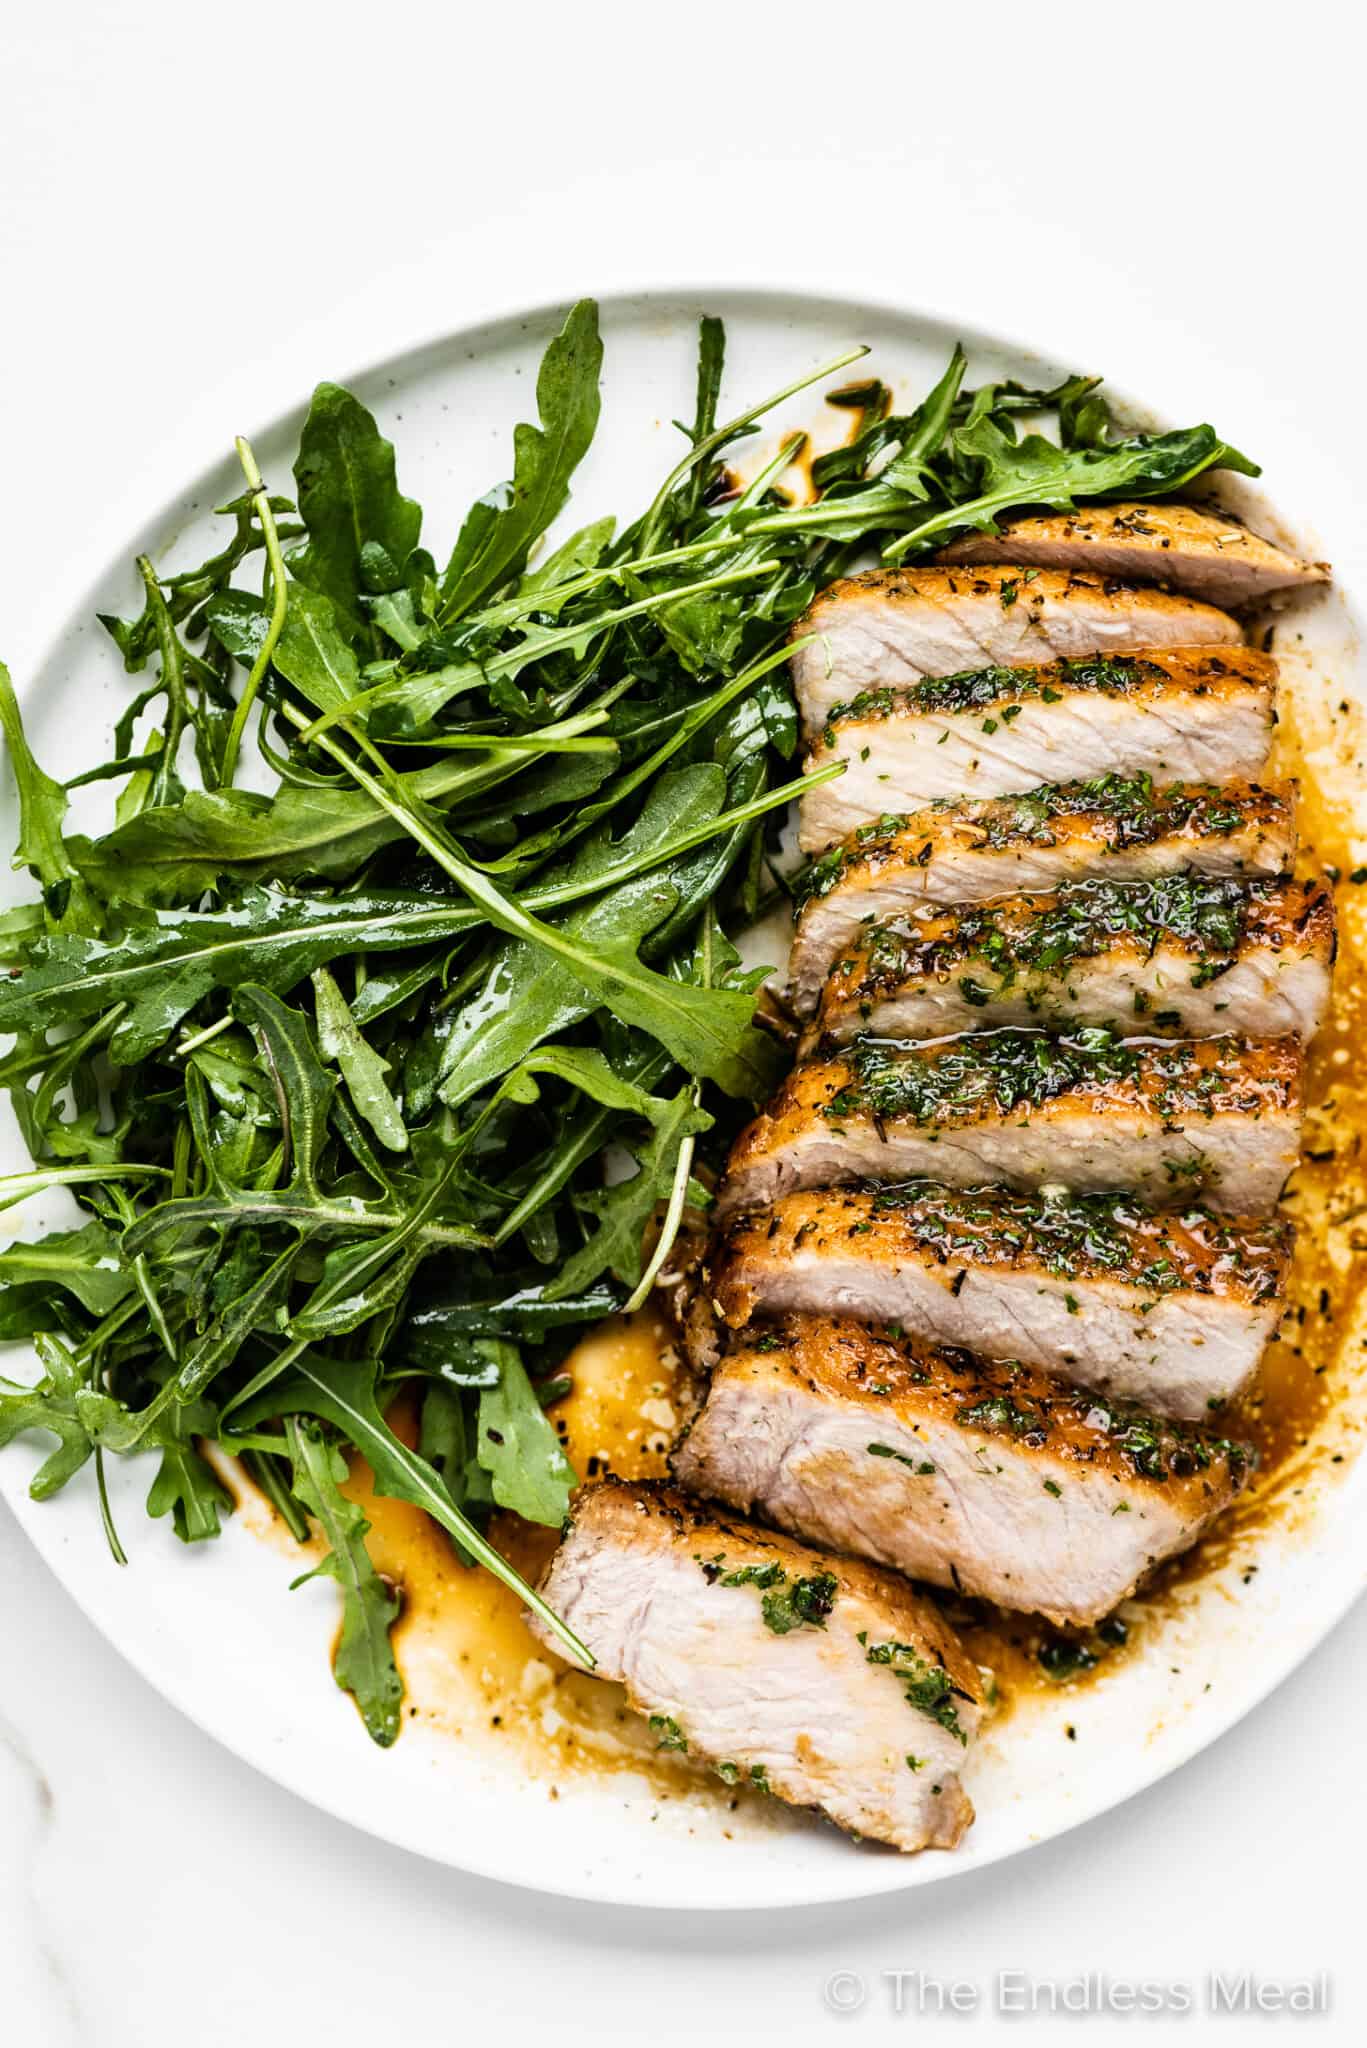 Sliced pan seared pork chops drizzled with honey herb butter and arugula salad.